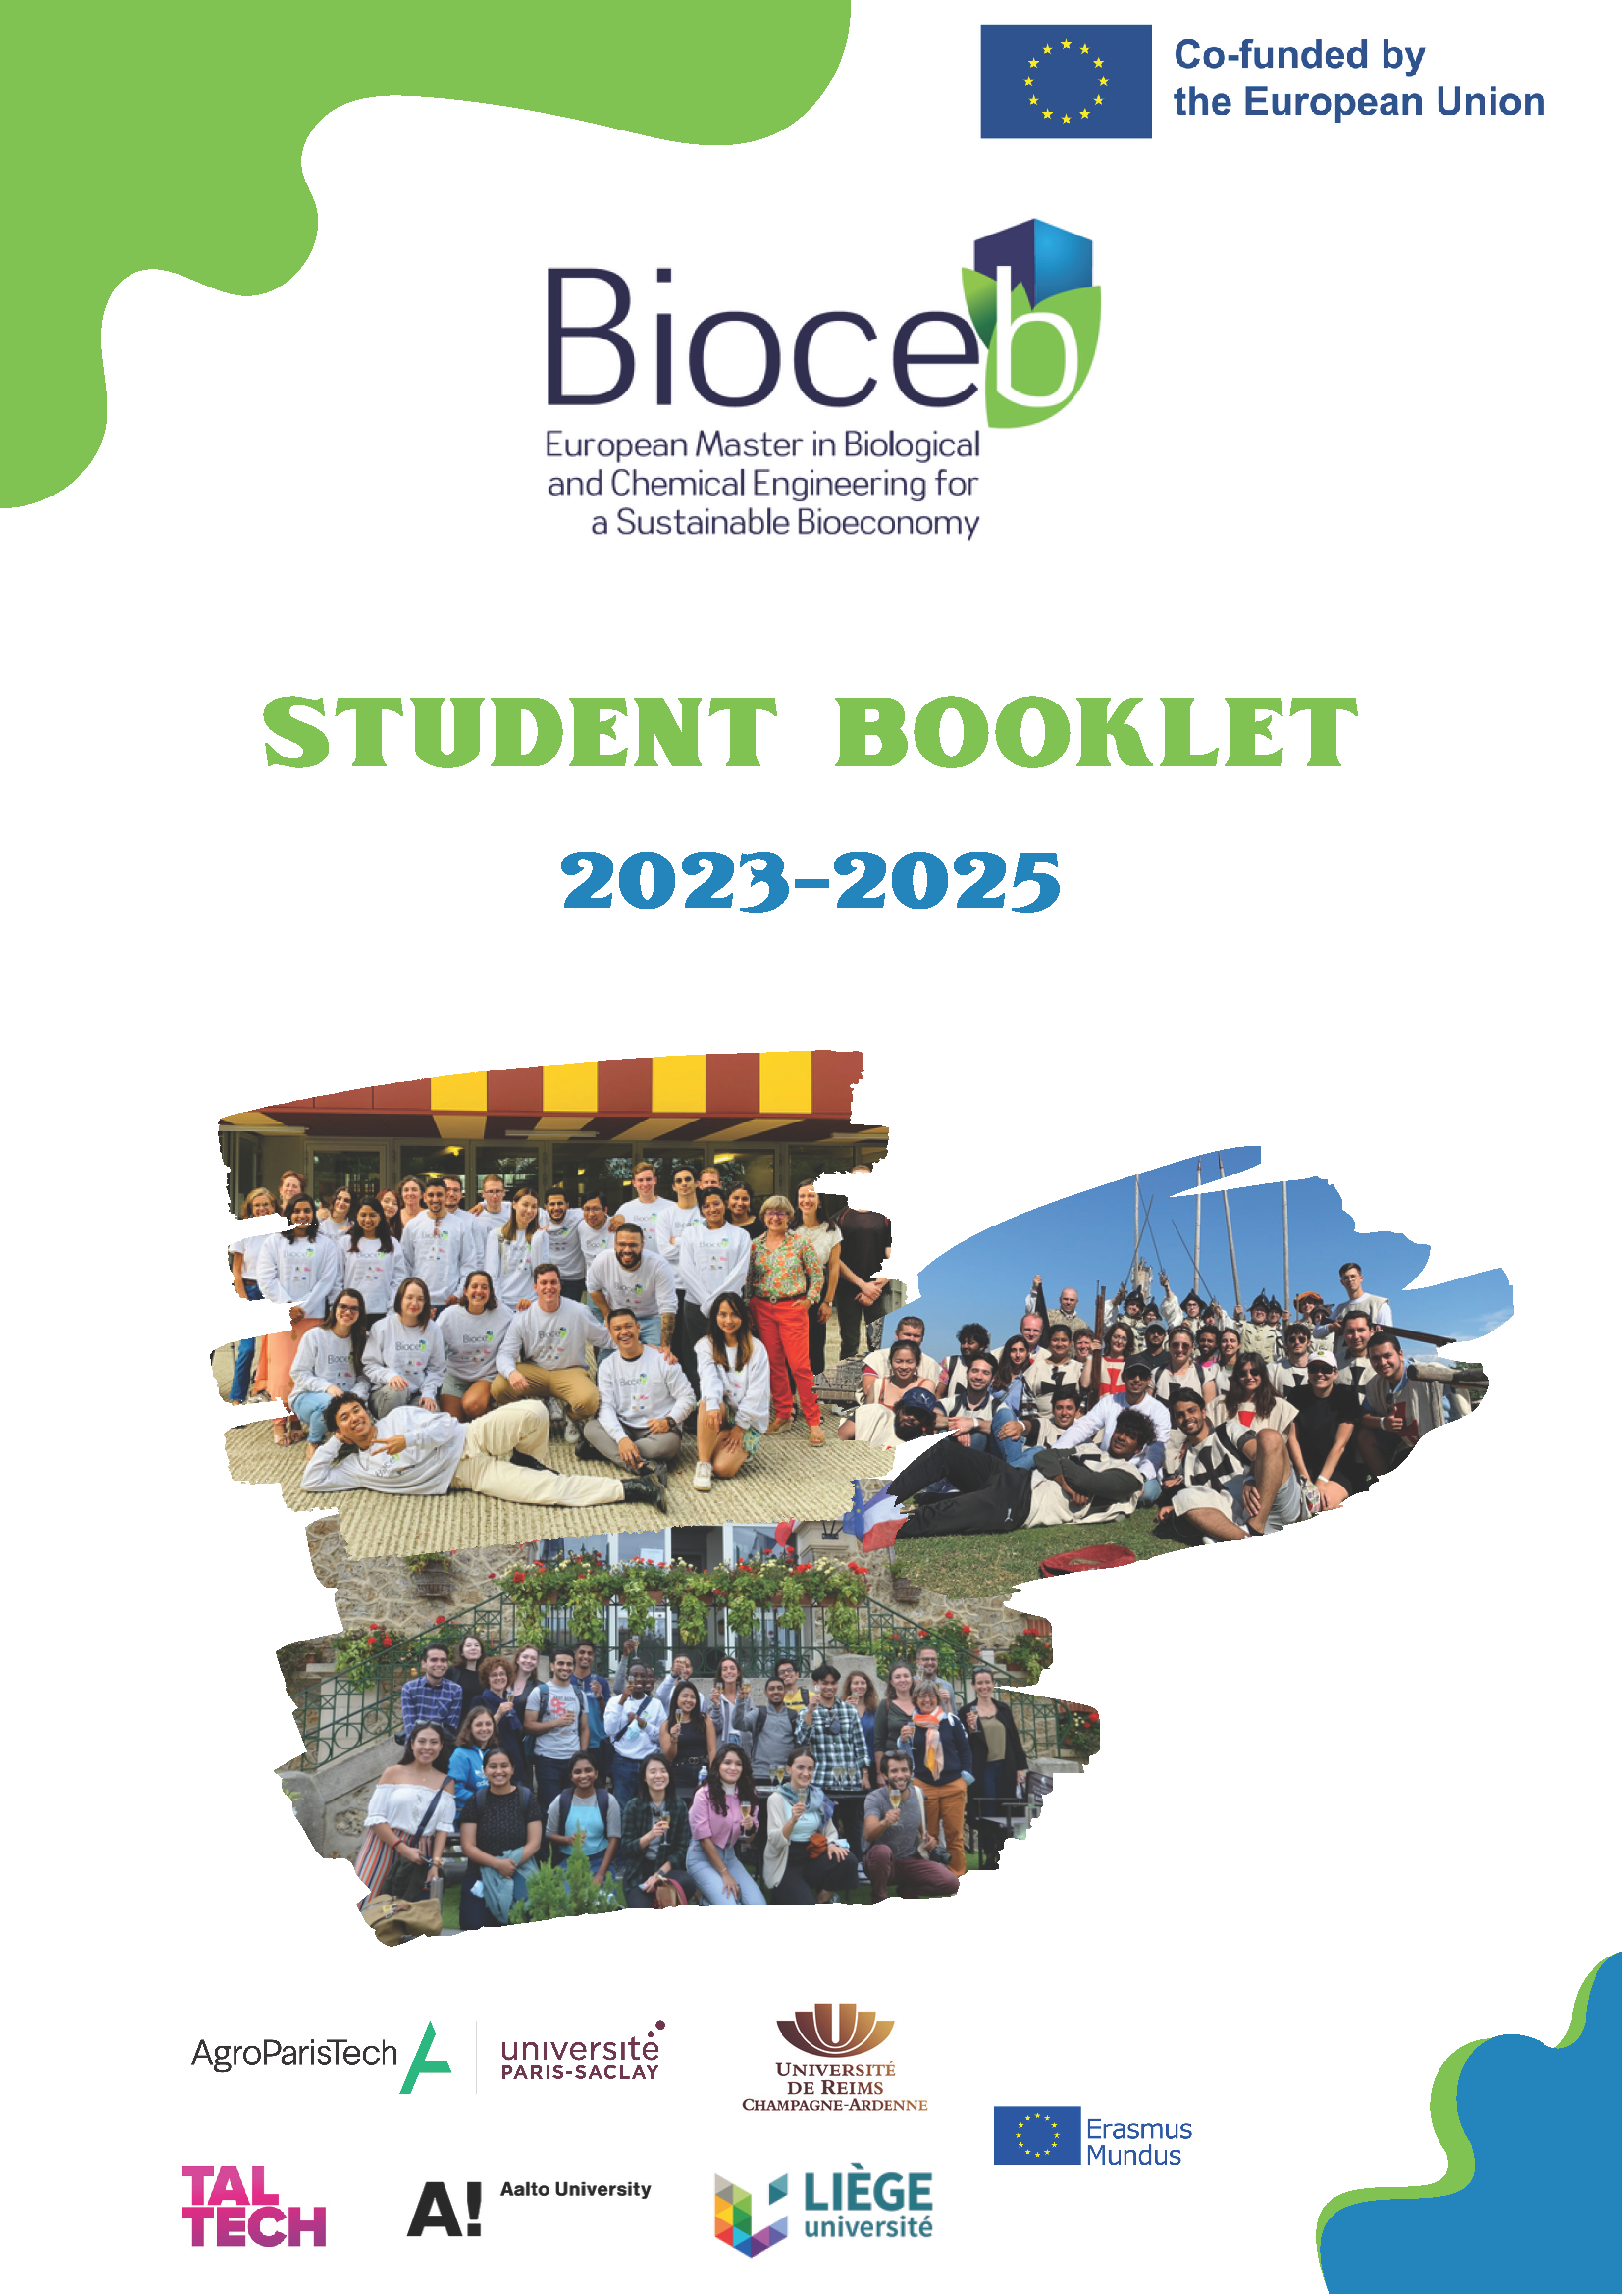 Student booklet 2023 - 2025